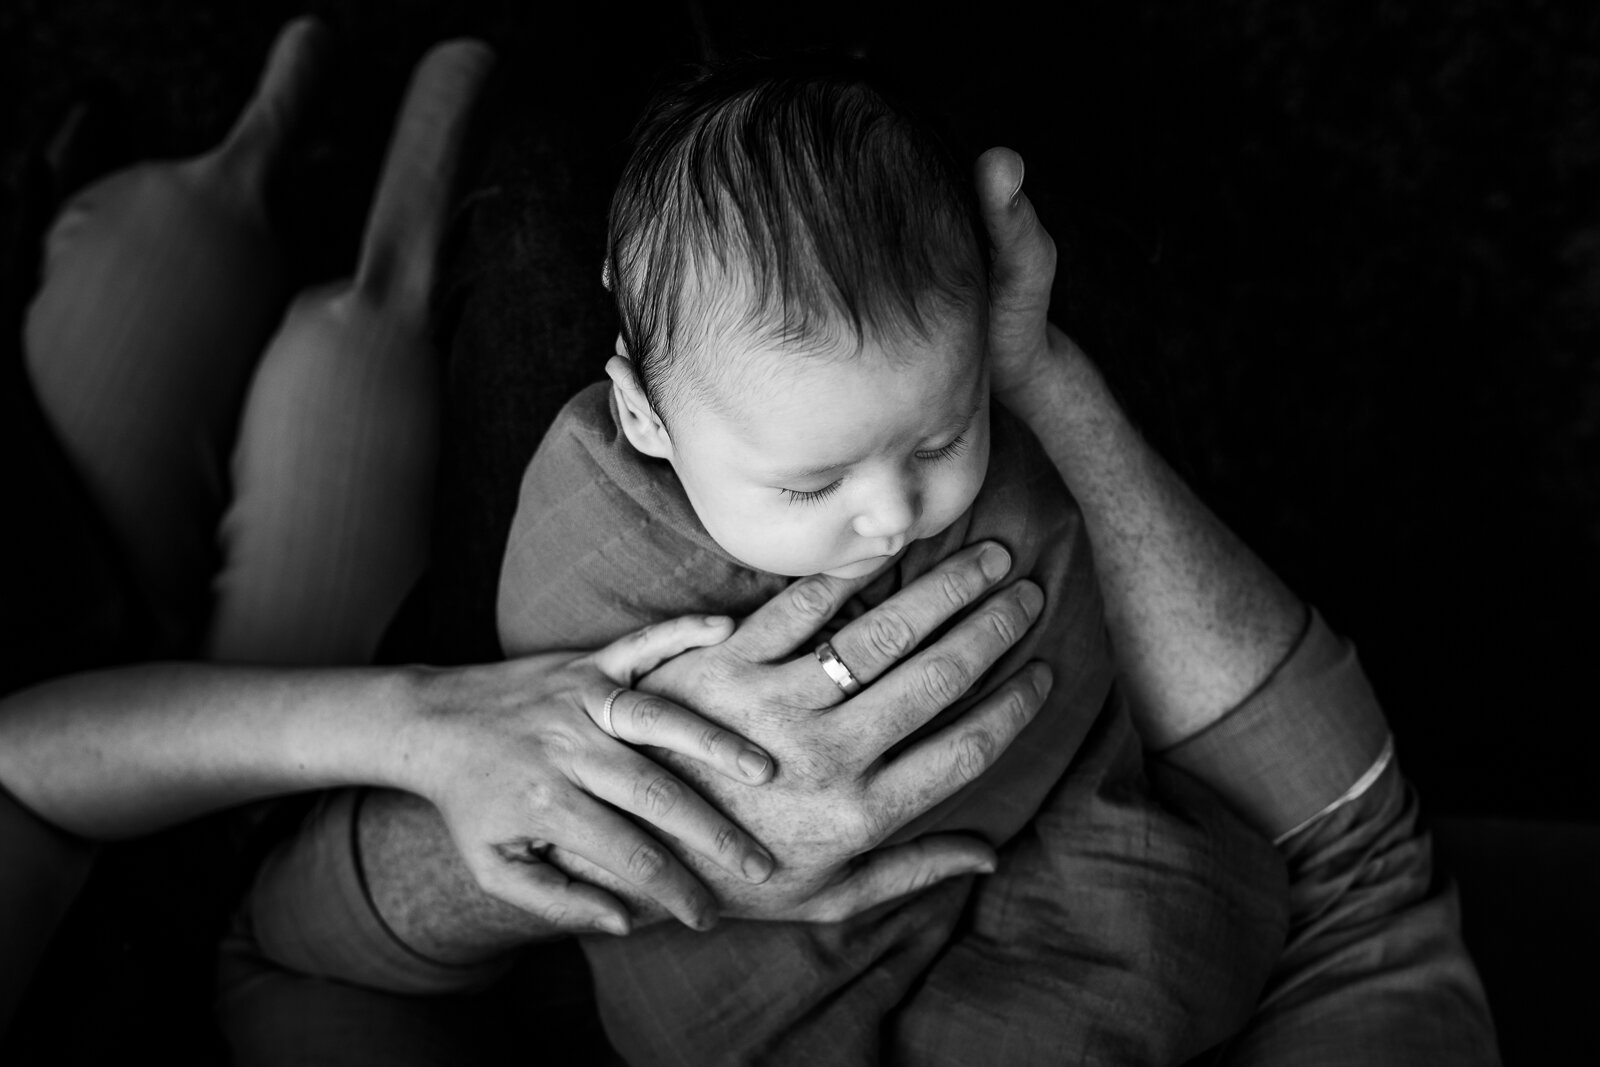 birds-eye view of baby boy in dad's arms with mom's hand touching him - Oakland Newborn Photographer